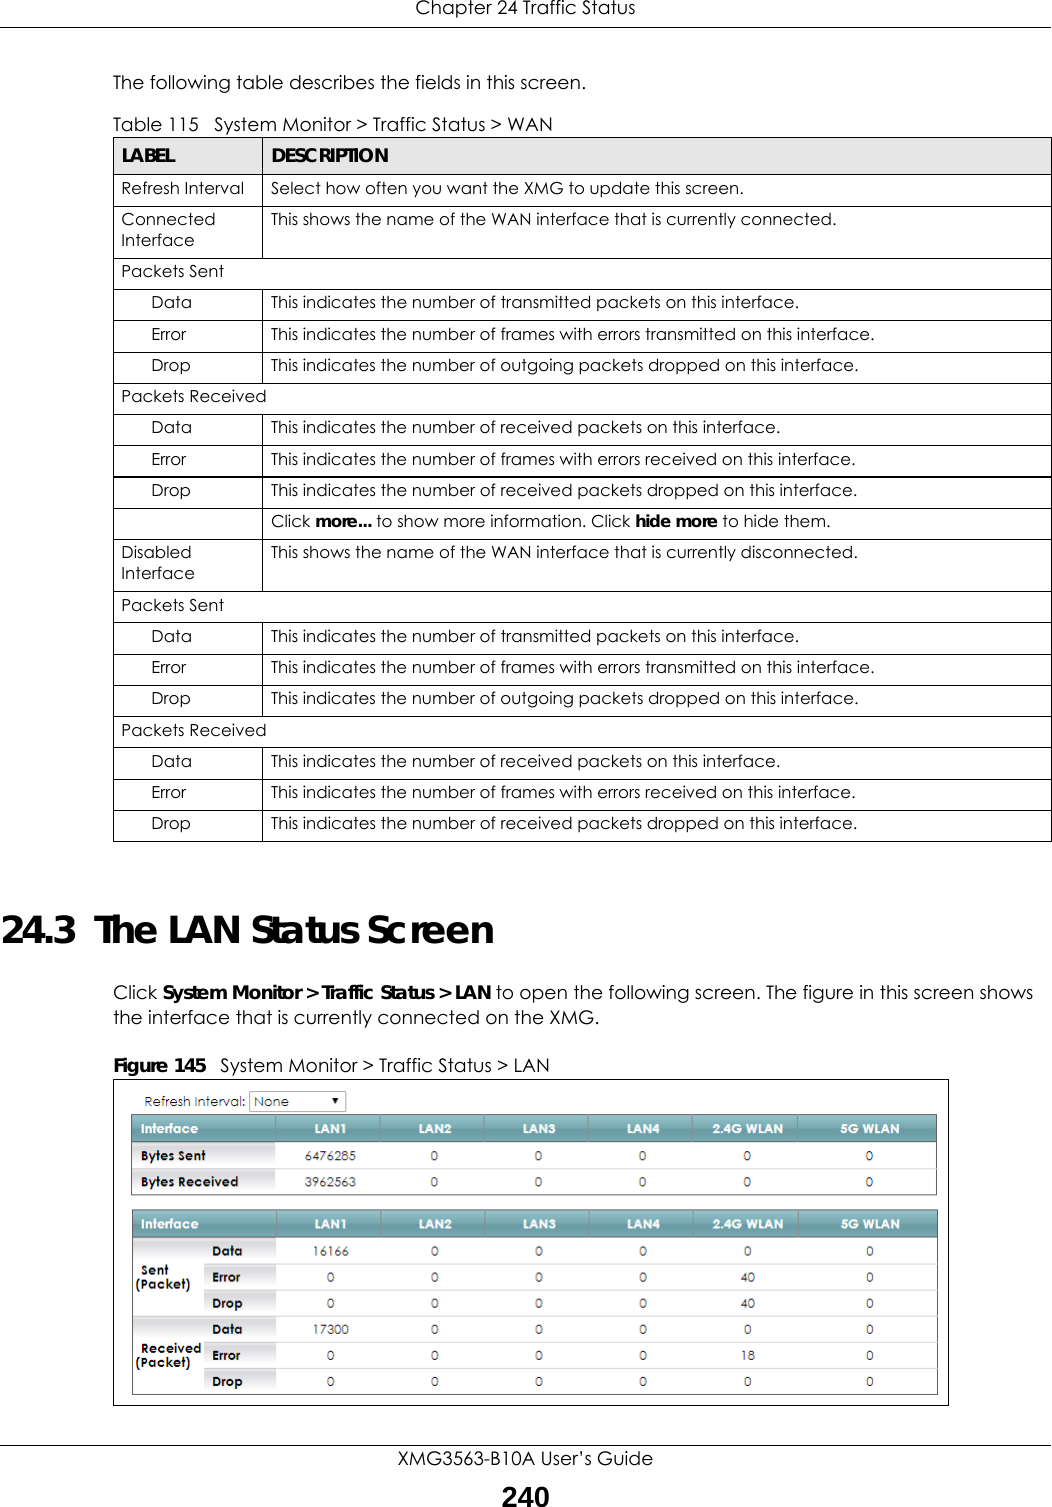 Chapter 24 Traffic StatusXMG3563-B10A User’s Guide240The following table describes the fields in this screen.   24.3  The LAN Status ScreenClick System Monitor &gt; Traffic Status &gt; LAN to open the following screen. The figure in this screen shows the interface that is currently connected on the XMG.Figure 145   System Monitor &gt; Traffic Status &gt; LANTable 115   System Monitor &gt; Traffic Status &gt; WANLABEL DESCRIPTIONRefresh Interval Select how often you want the XMG to update this screen.Connected Interface This shows the name of the WAN interface that is currently connected.Packets Sent Data  This indicates the number of transmitted packets on this interface.Error This indicates the number of frames with errors transmitted on this interface.Drop This indicates the number of outgoing packets dropped on this interface.Packets ReceivedData  This indicates the number of received packets on this interface.Error This indicates the number of frames with errors received on this interface.Drop This indicates the number of received packets dropped on this interface.Click more... to show more information. Click hide more to hide them.Disabled InterfaceThis shows the name of the WAN interface that is currently disconnected.Packets Sent Data  This indicates the number of transmitted packets on this interface.Error This indicates the number of frames with errors transmitted on this interface.Drop This indicates the number of outgoing packets dropped on this interface.Packets ReceivedData  This indicates the number of received packets on this interface.Error This indicates the number of frames with errors received on this interface.Drop This indicates the number of received packets dropped on this interface.